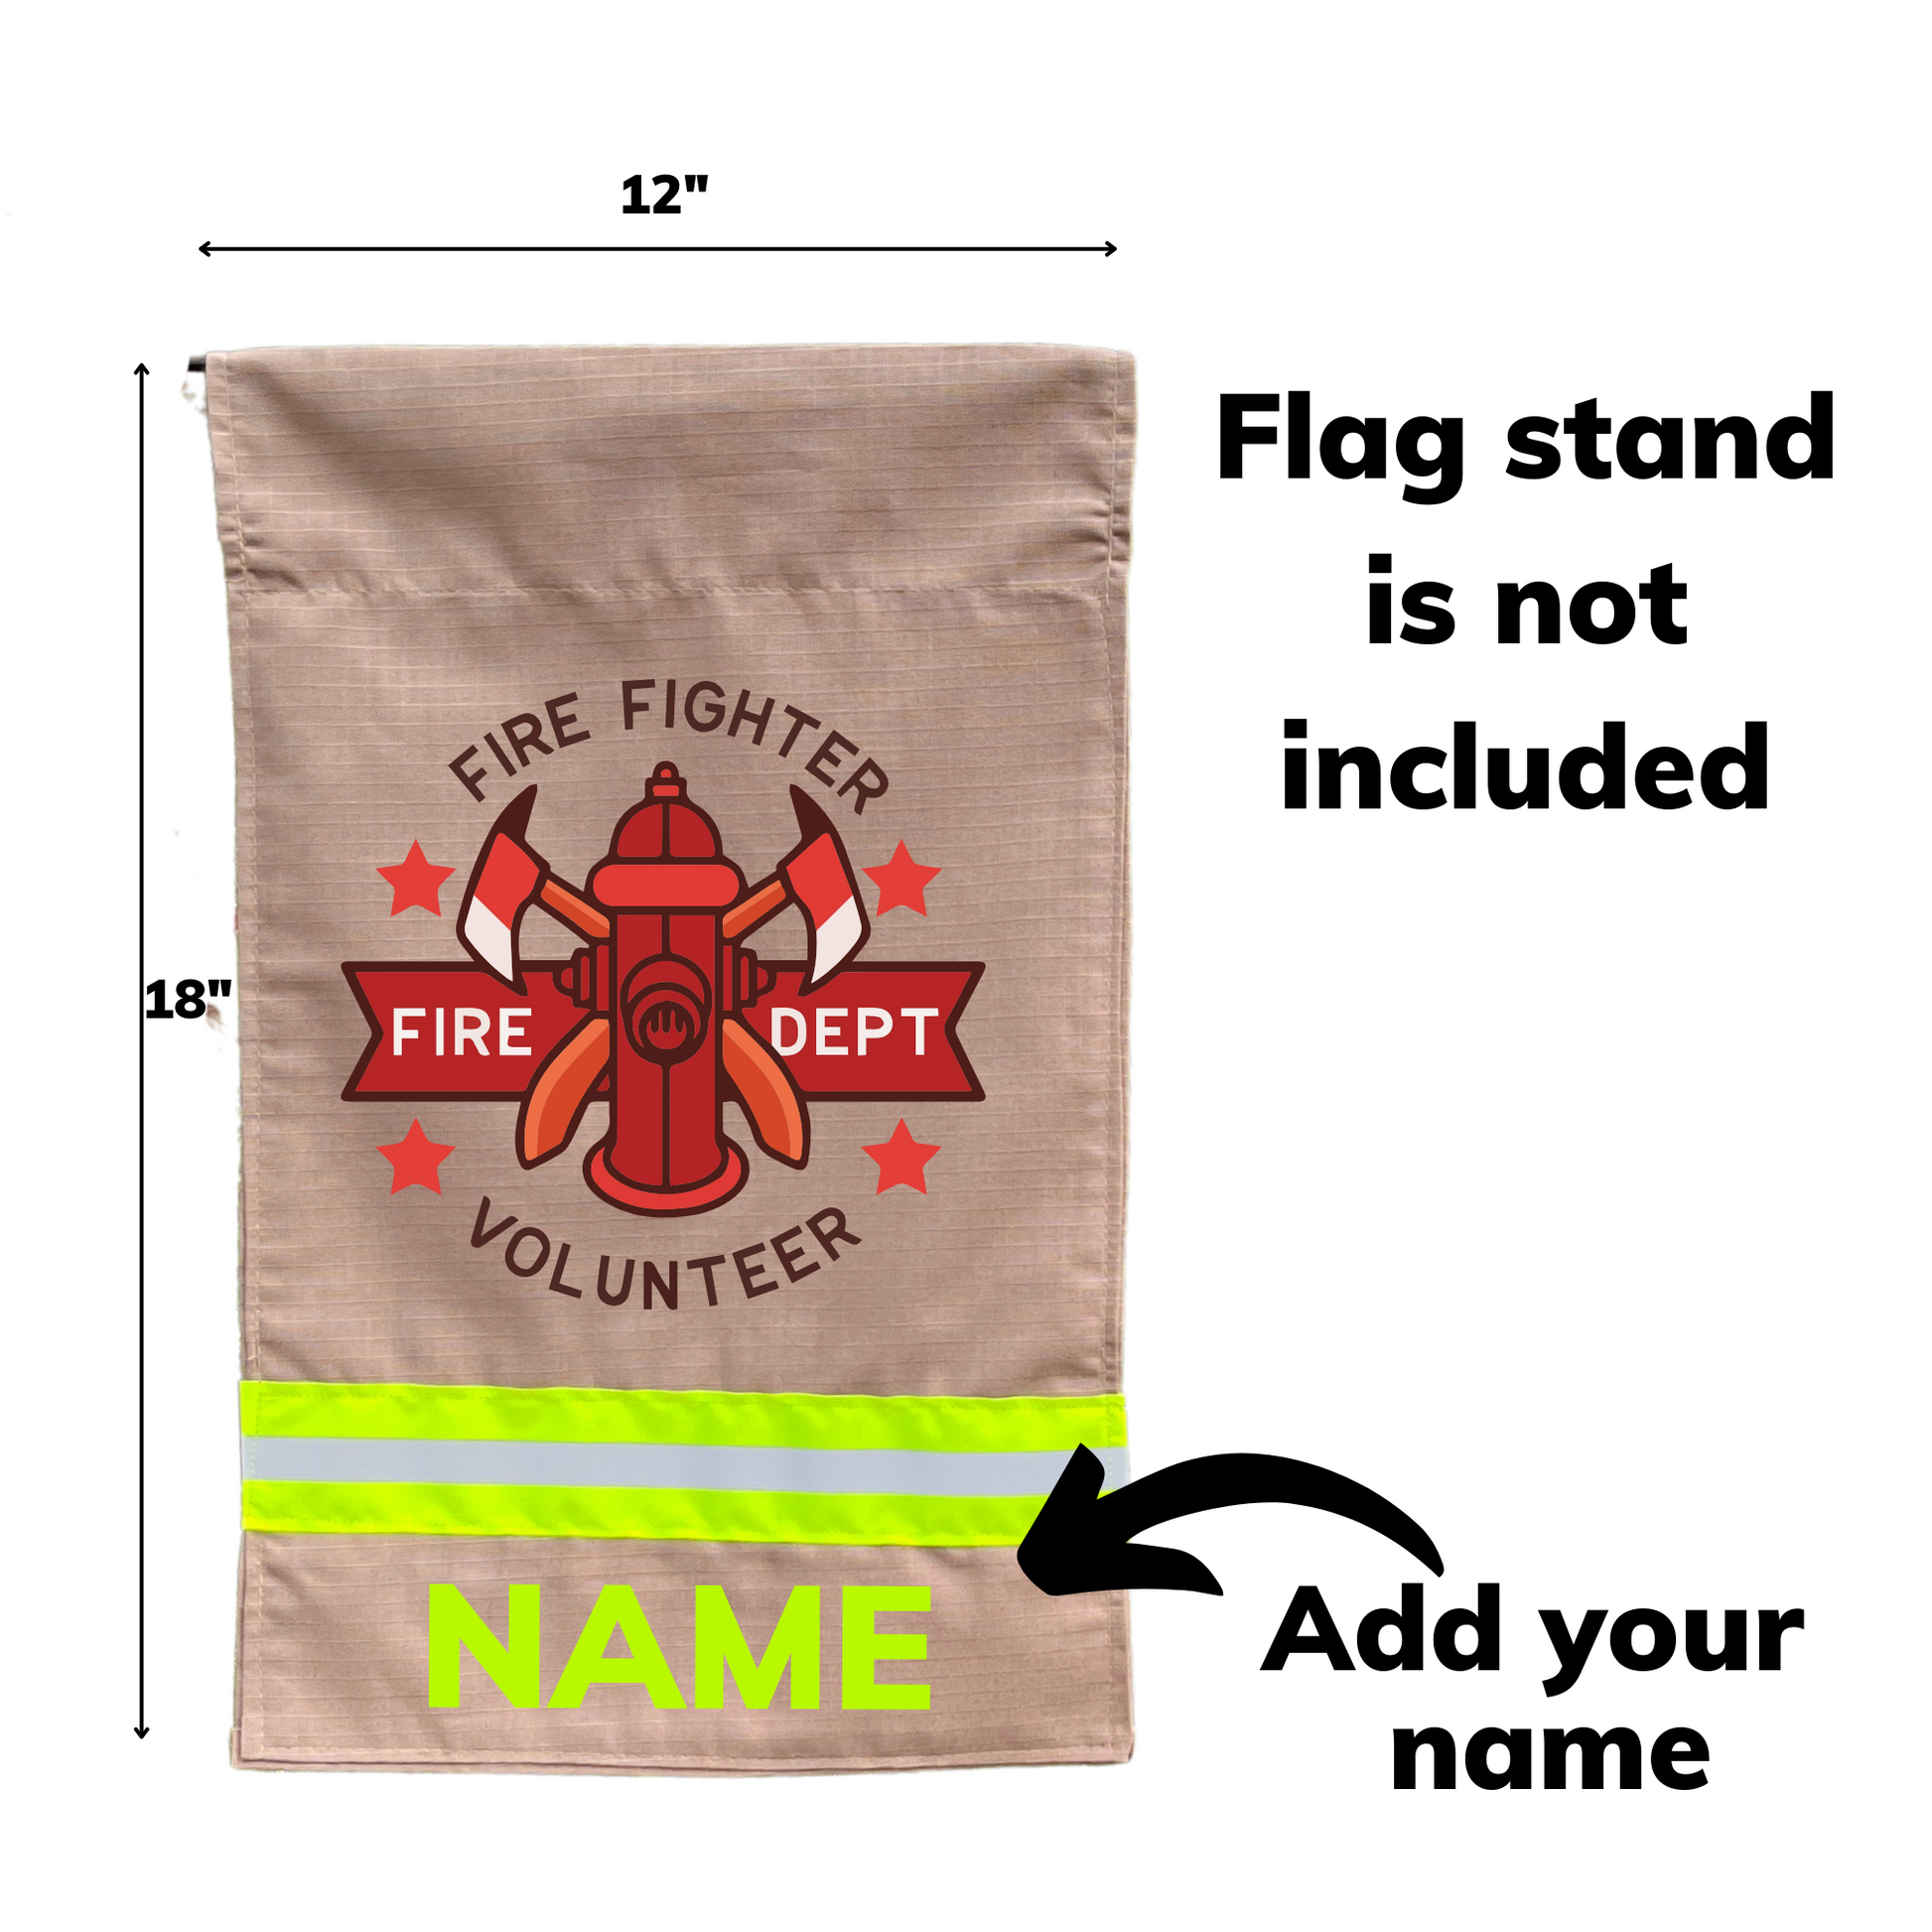 garden flag size 12 inches by 18 inches. add your name to the bottom of the flag, Flag stand not included